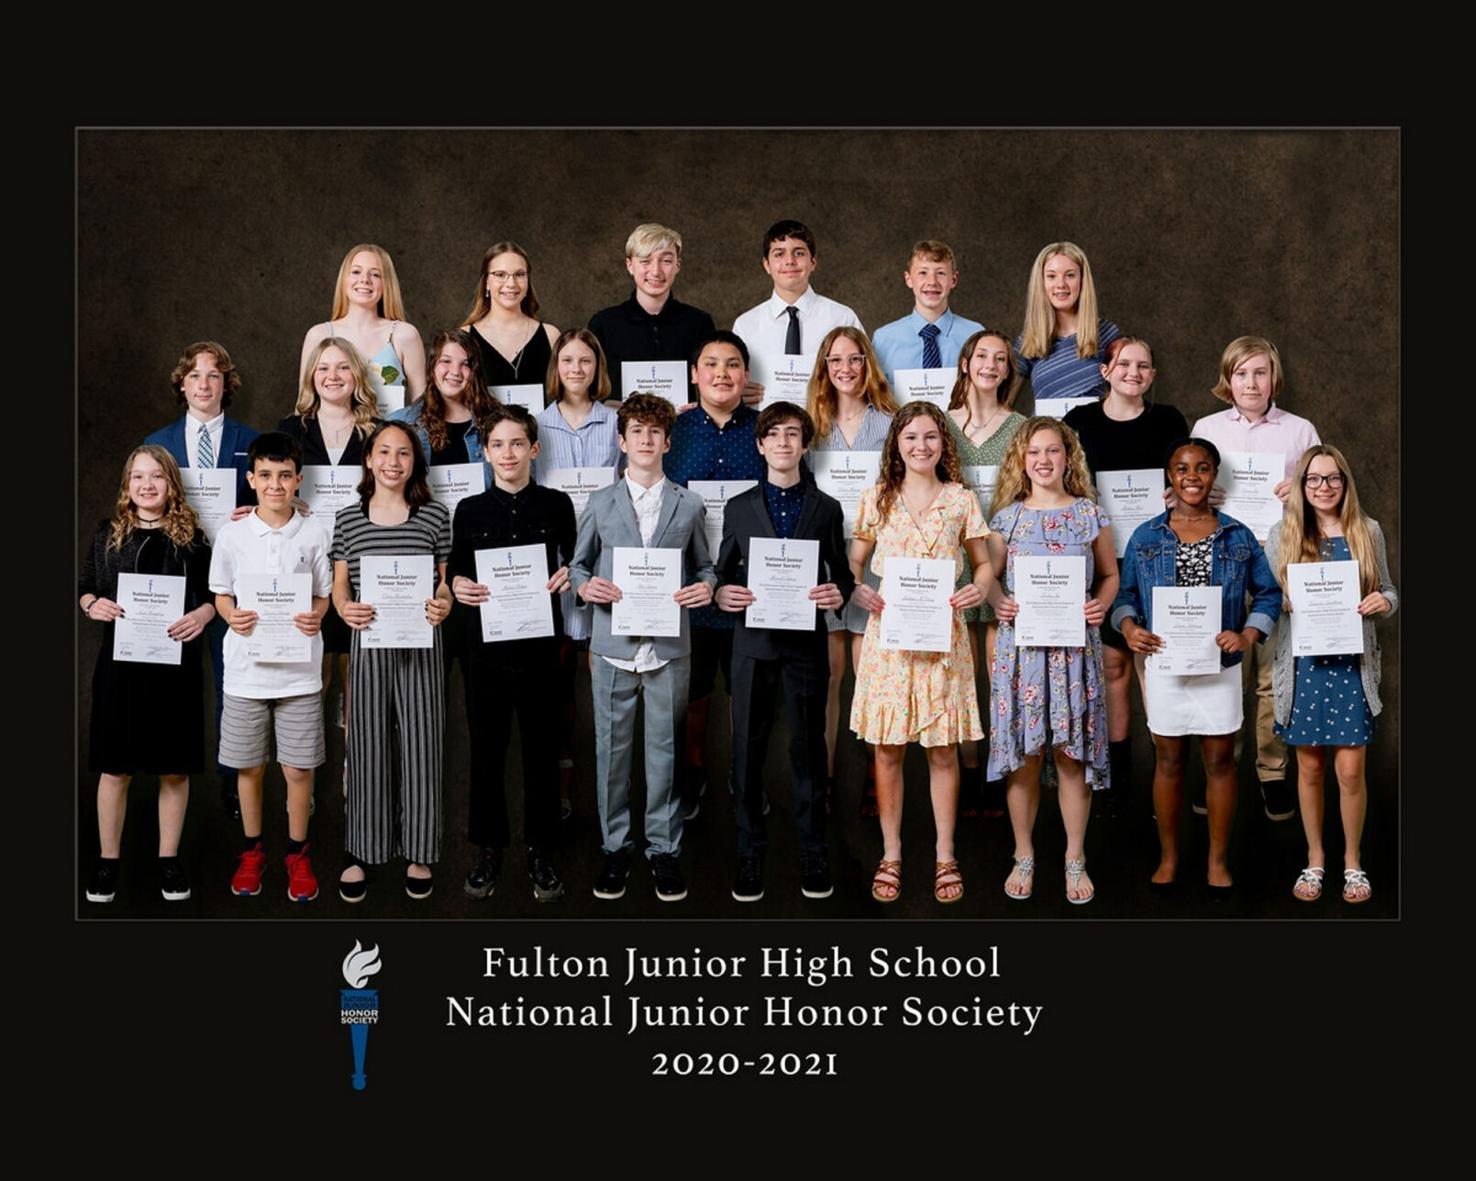 Fulton Junior High School inducts 27 into National Junior Honor Society